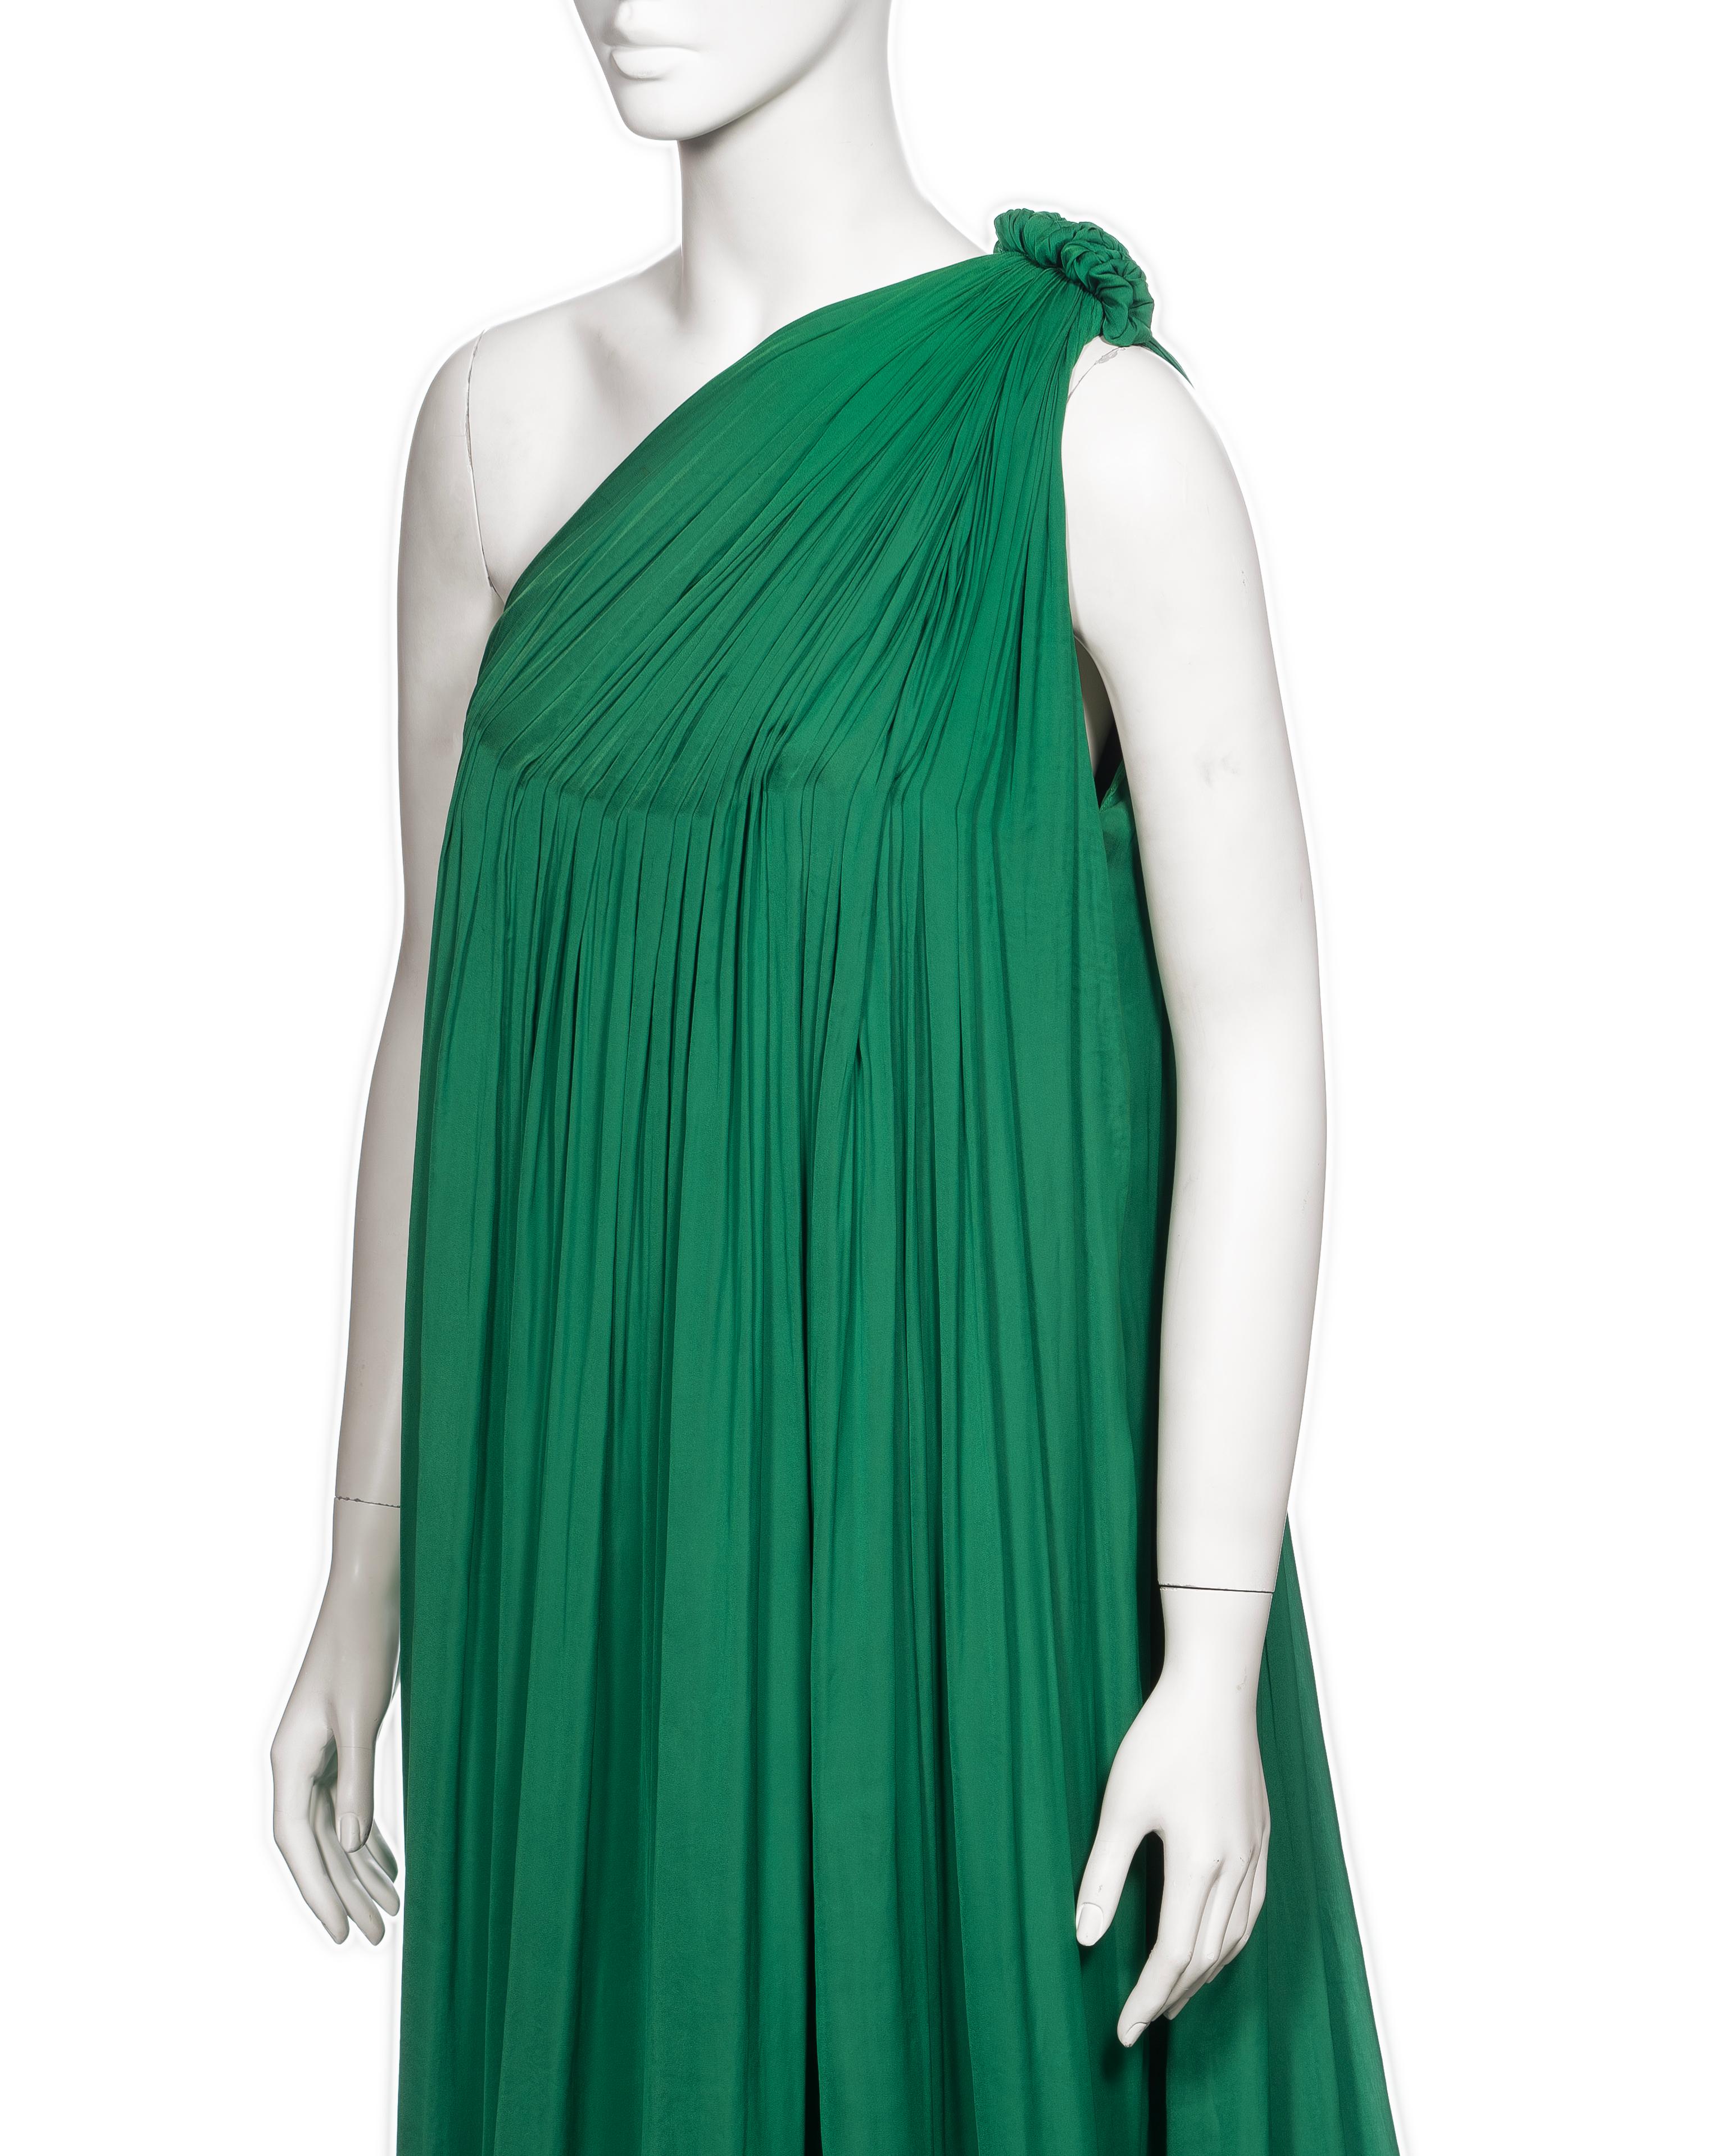 Lanvin by Alber Elbaz Green Pleated One-Shoulder Evening Dress, SS 2008 For Sale 7